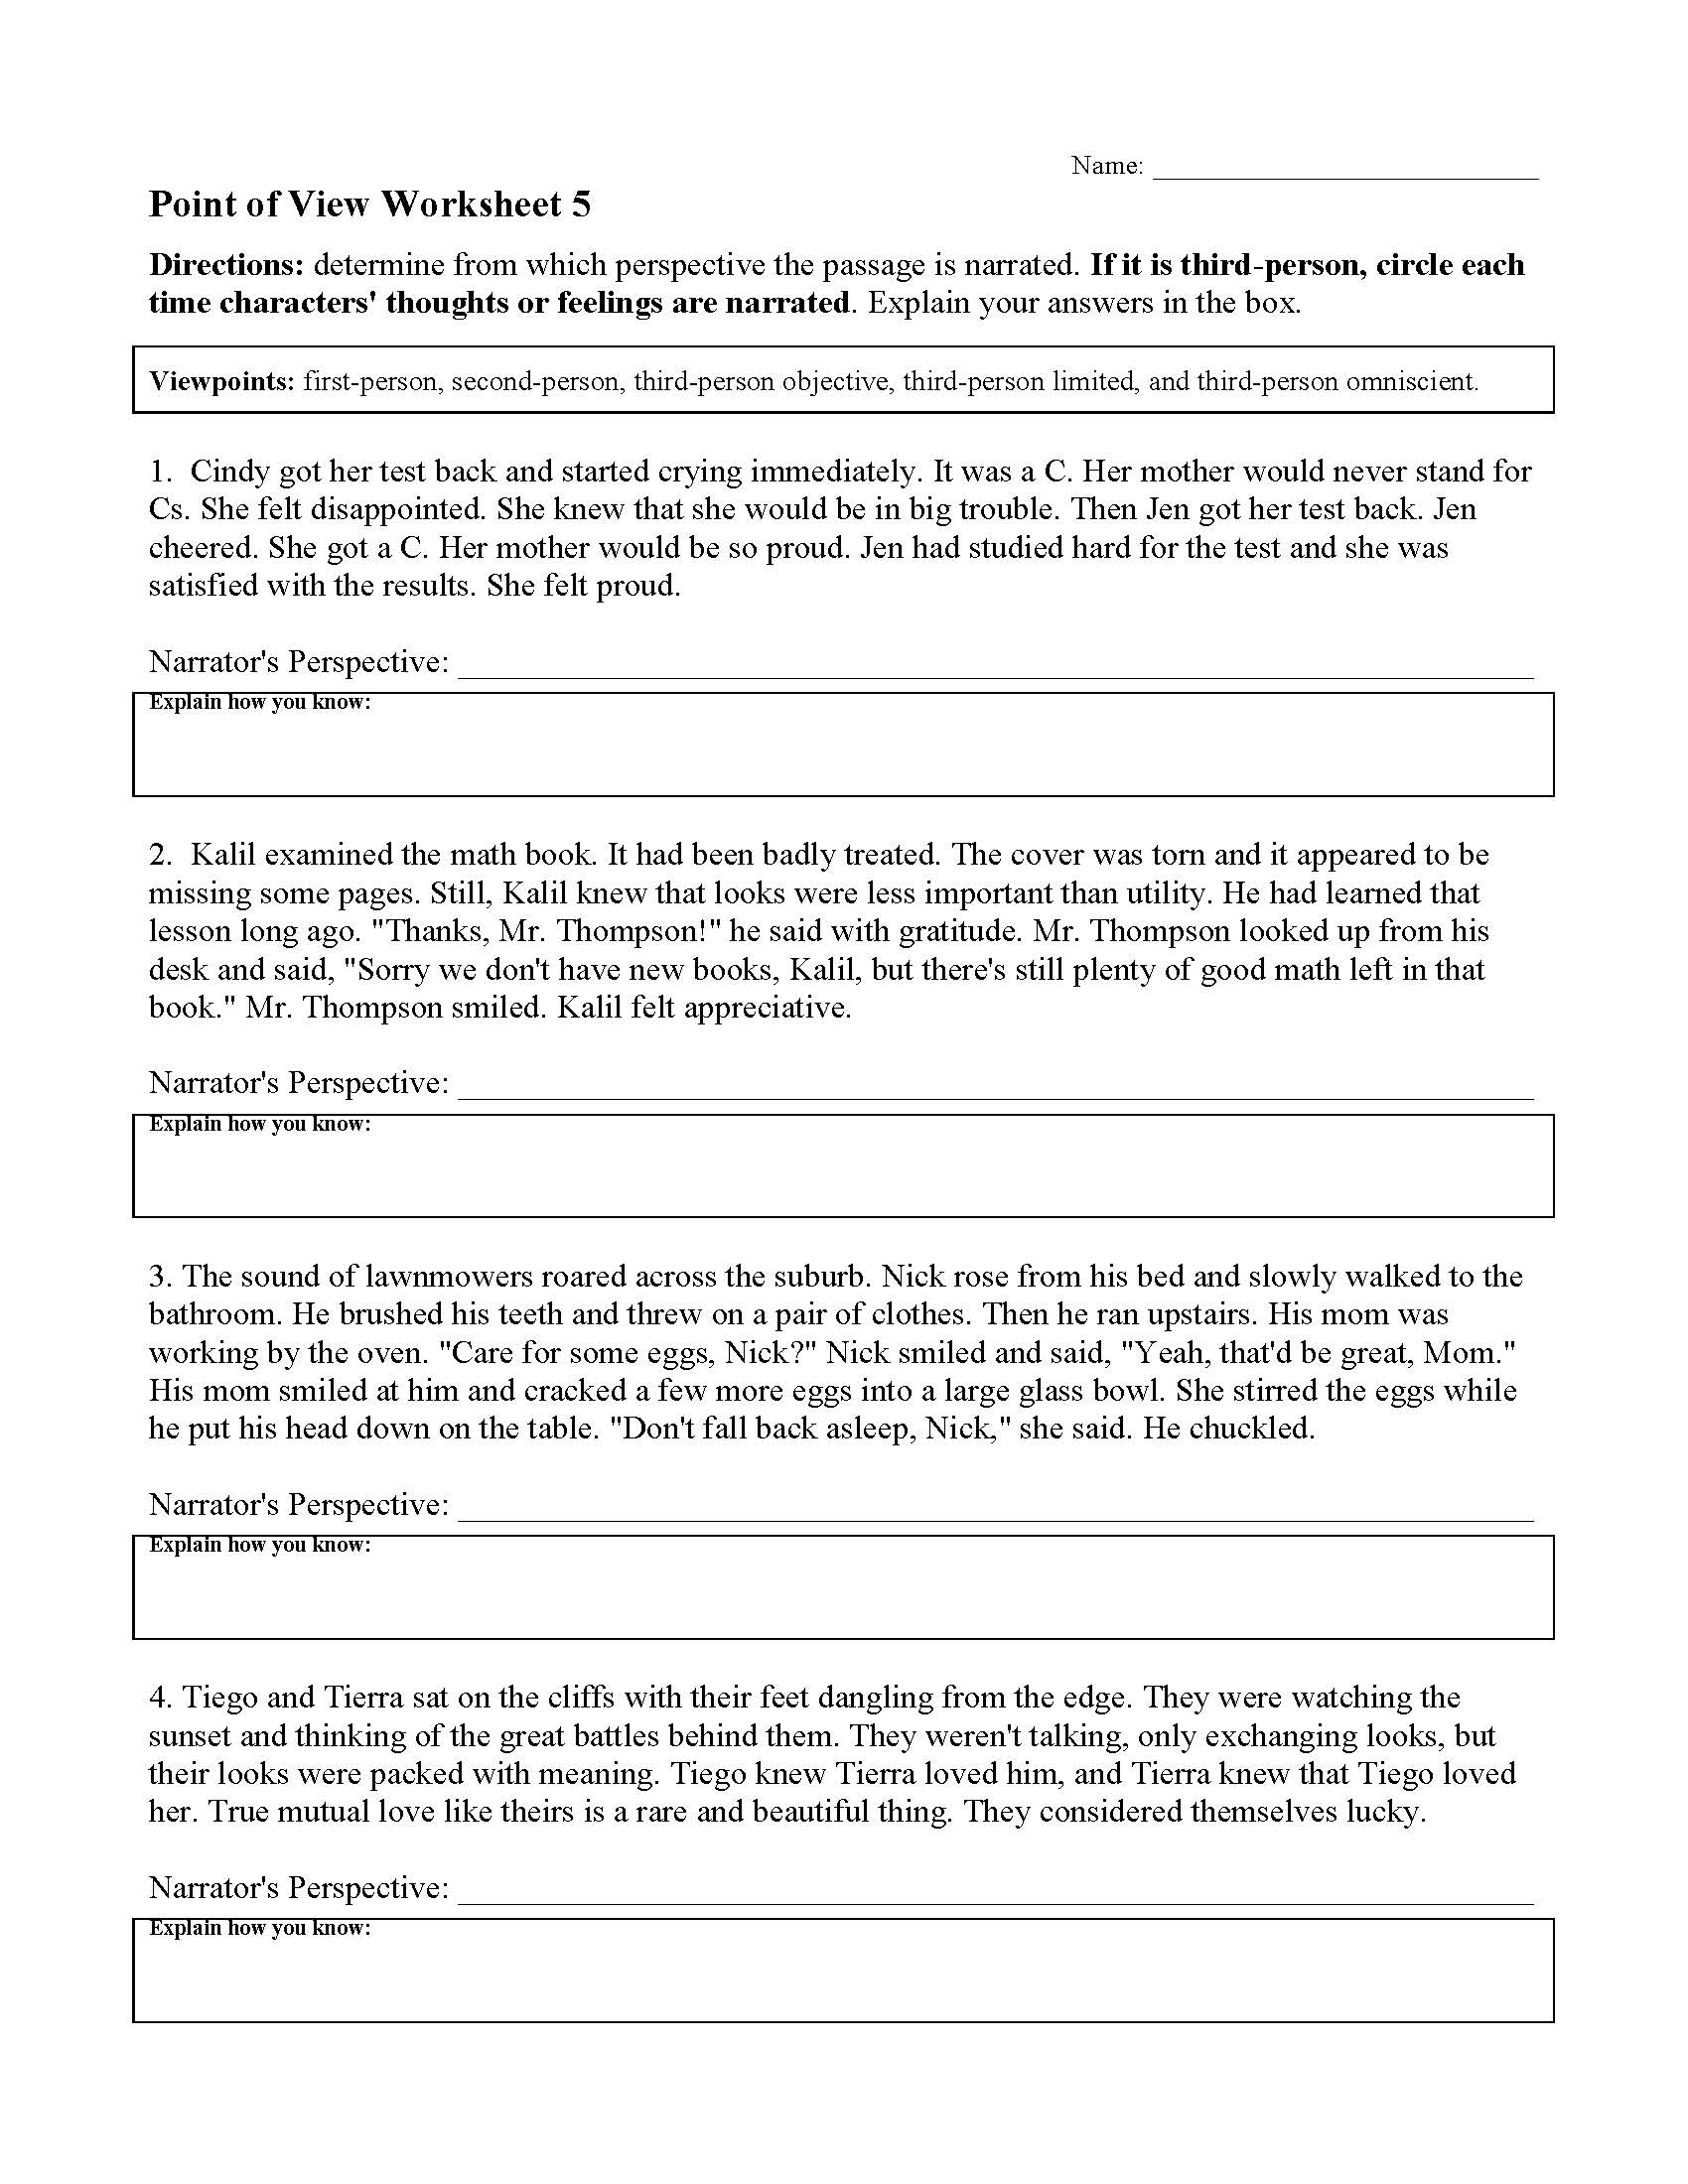 point-of-view-worksheet-5-preview